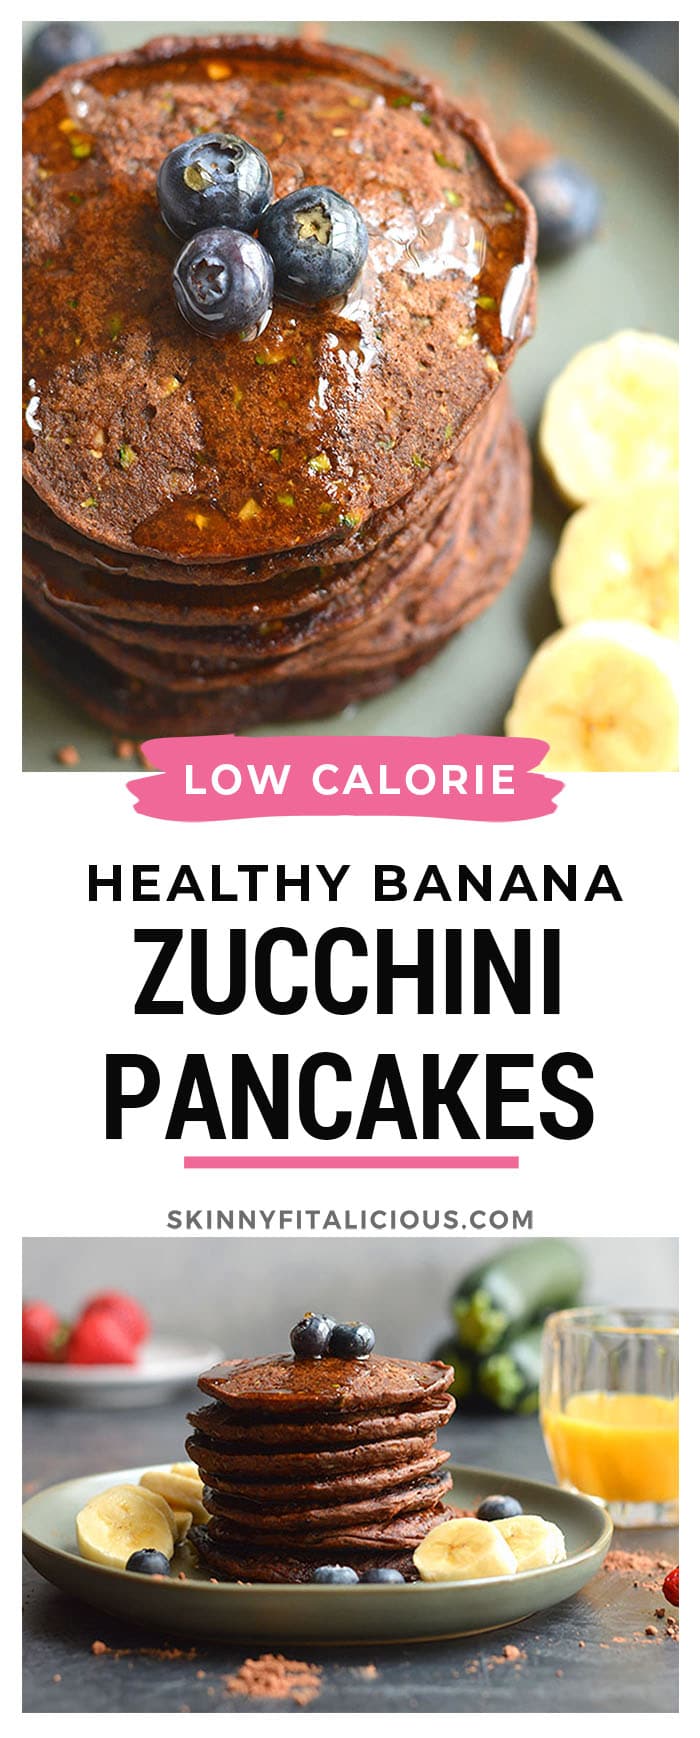 Zucchini Banana Pancakes are vegan, gluten free friendly and low in calories! Made with simple wholesome, real food ingredients and oh so tasty! These pancakes are a sneaky way to add more healthy foods to your diet in a chocolaty way.